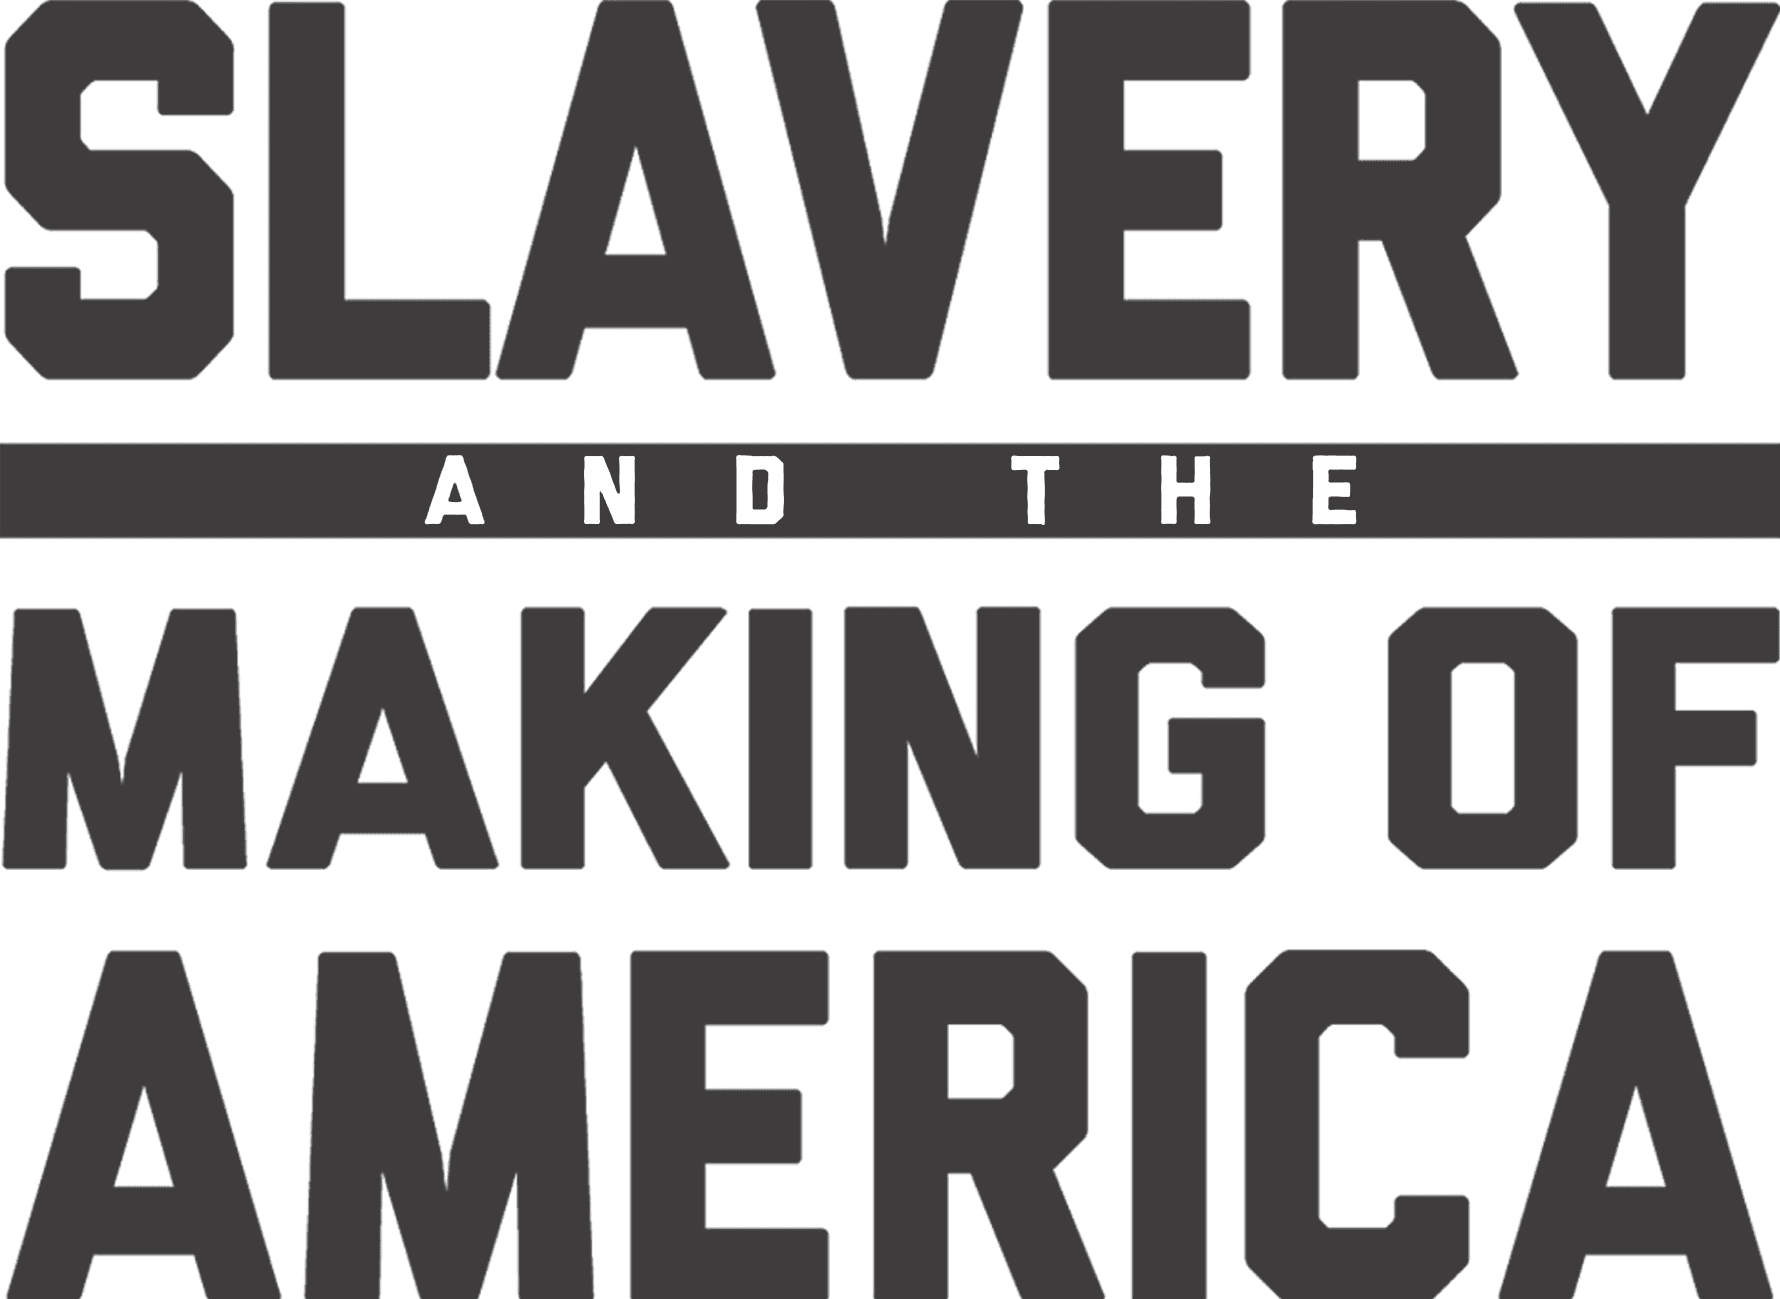 Slavery and the Making of America logo